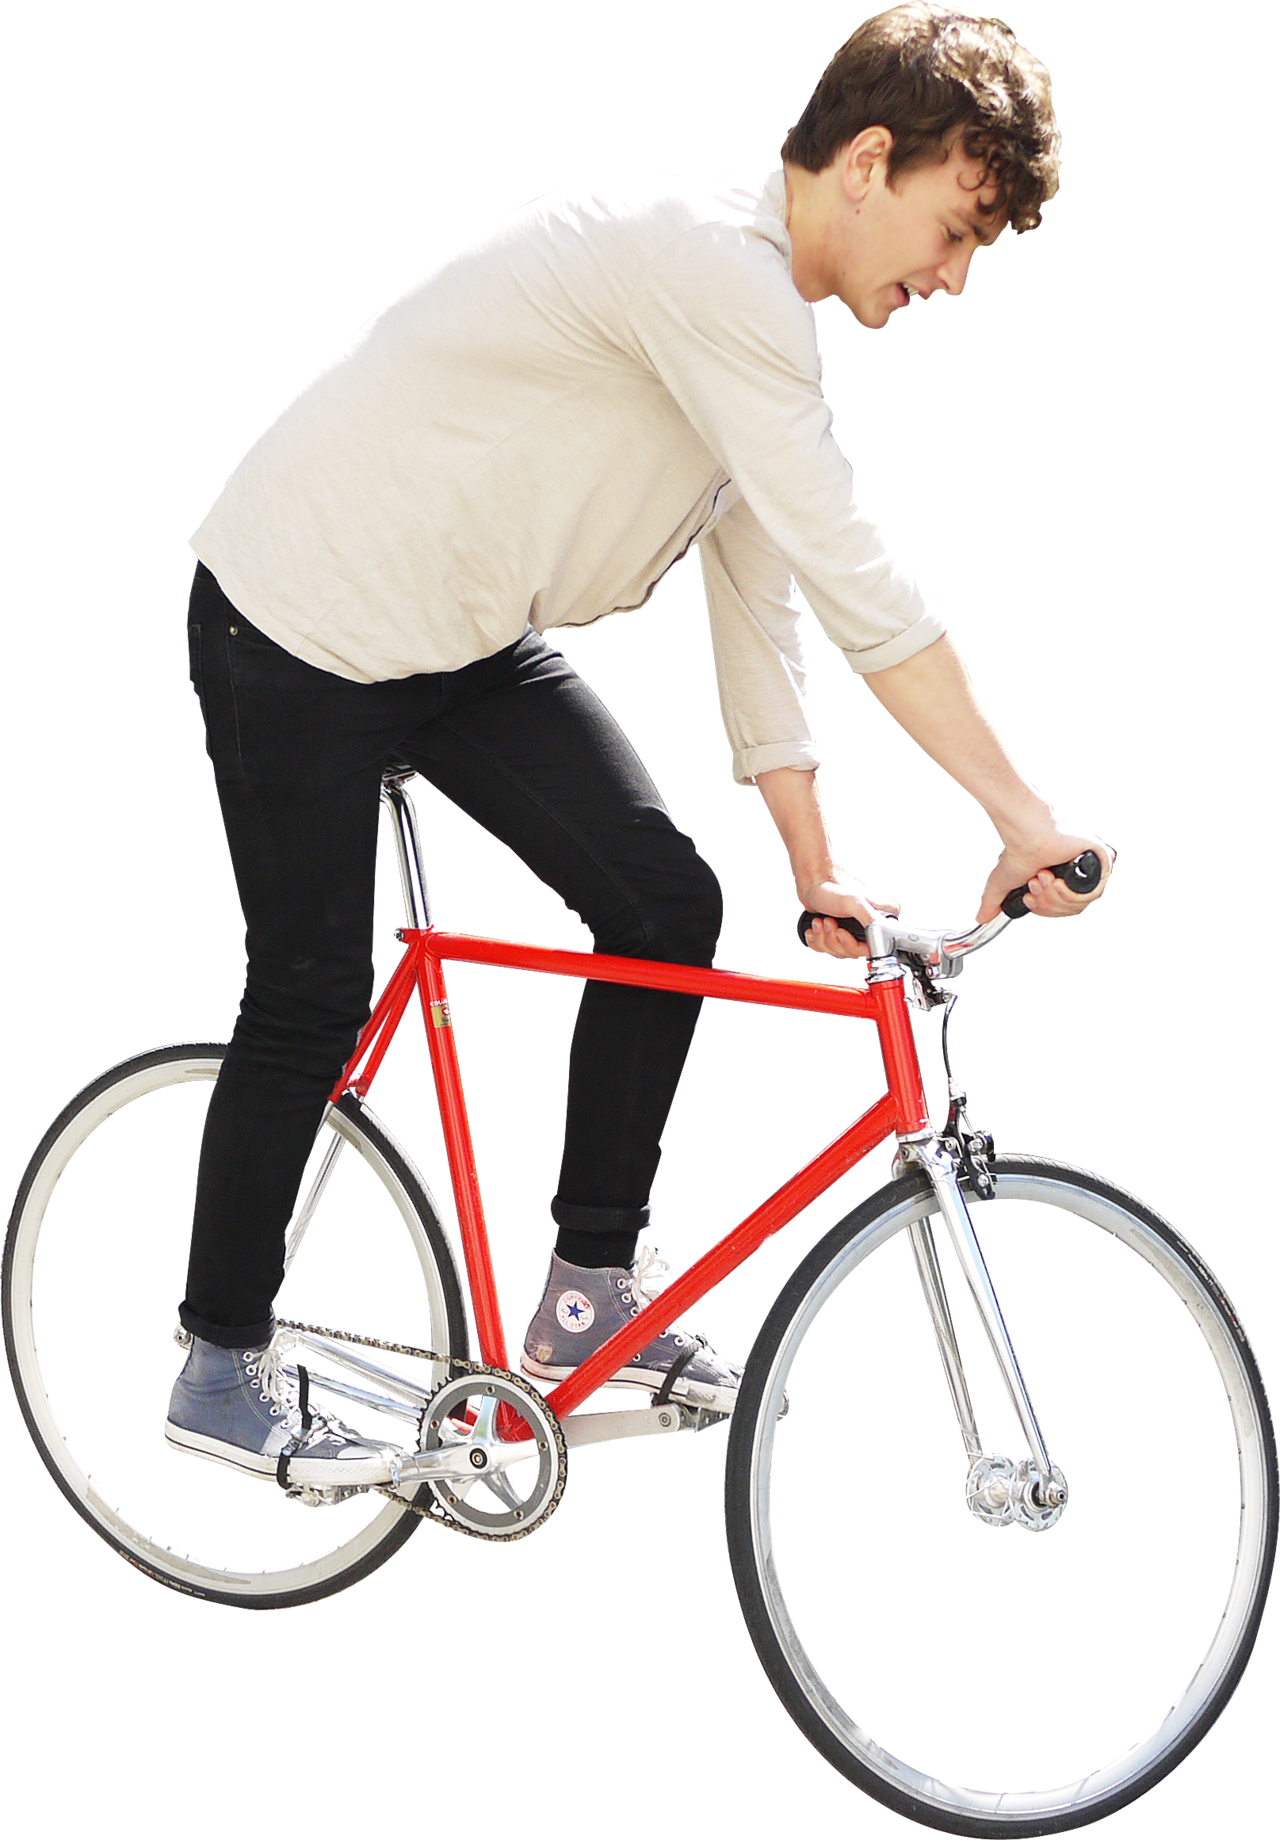 17 Photoshop Cut Out Cyclist Images Cut Out People